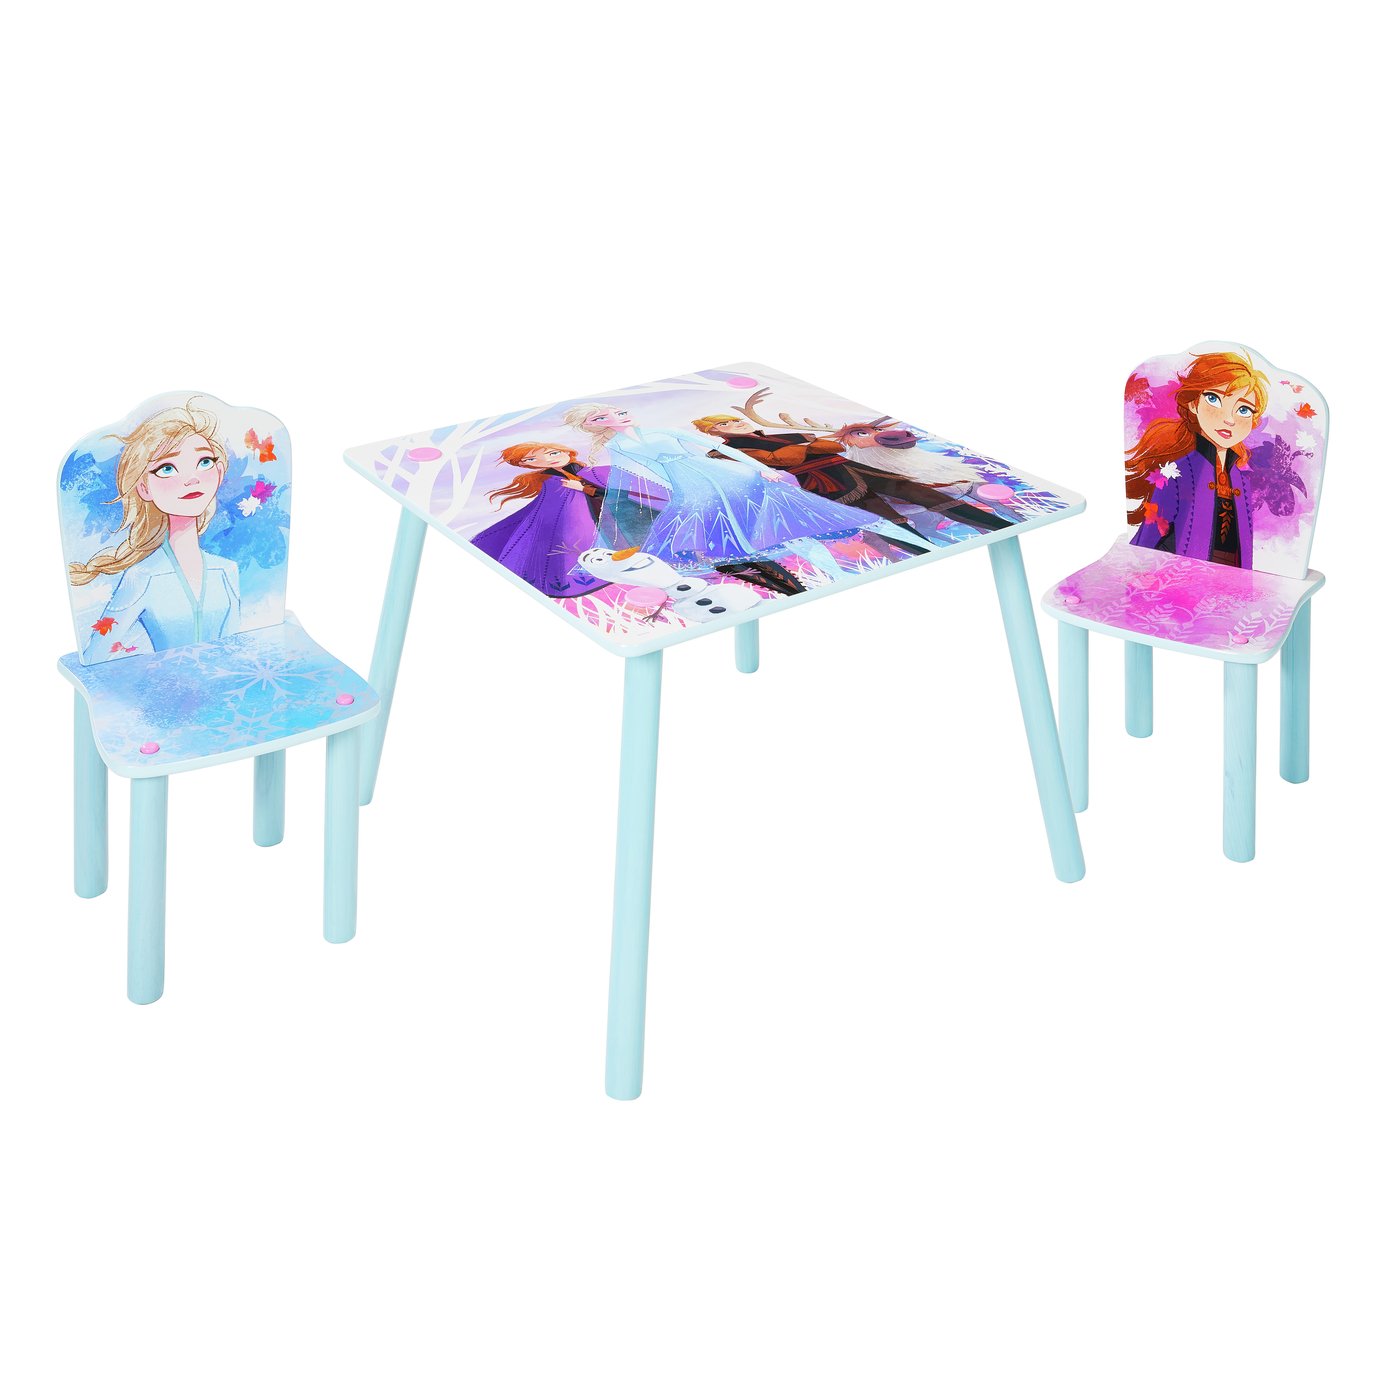 argos table and chairs for toddlers